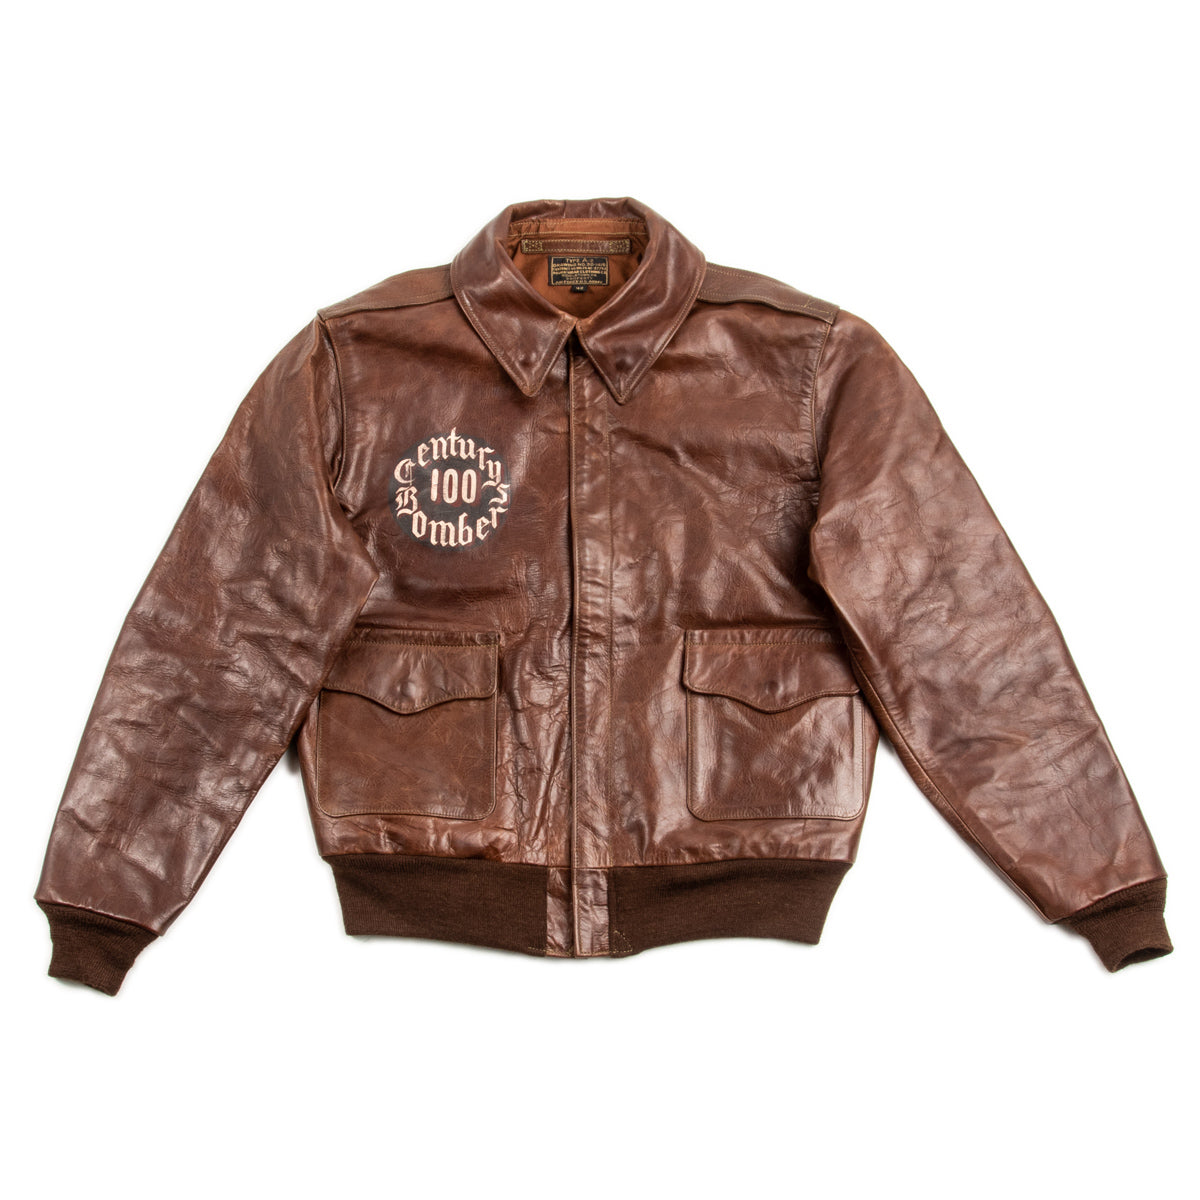 Eastman Leather Clothing Type A-2 Leather Jacket - Rough Wear 